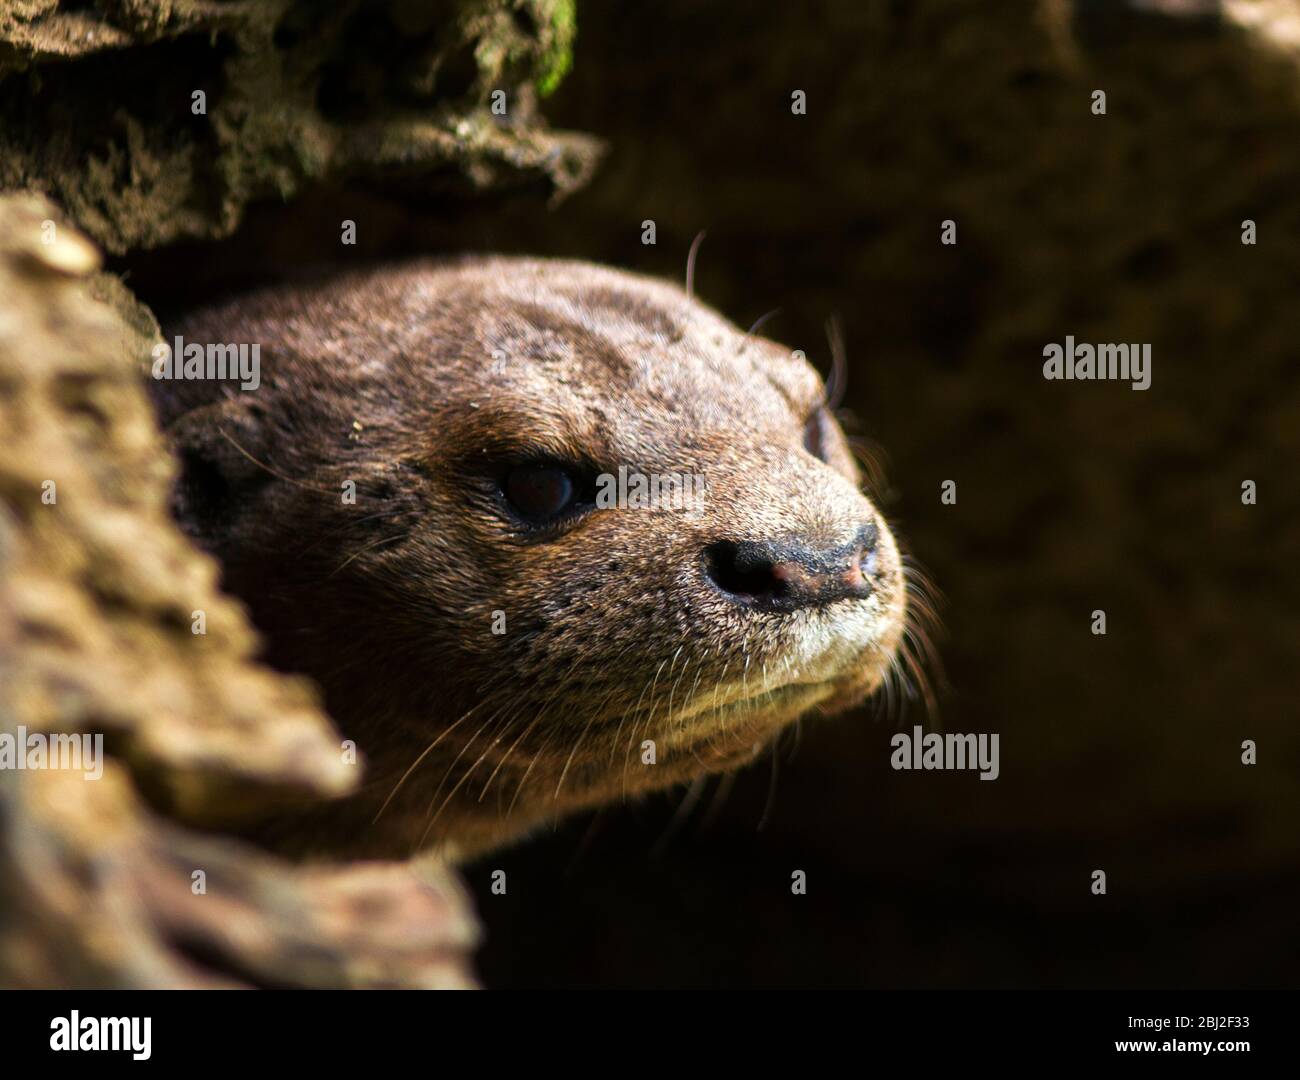 A Spotted-necked Otter peers out from the entrance from its holt. Though they were widespread these agile aquatic hunters have been persecuted for the Stock Photo